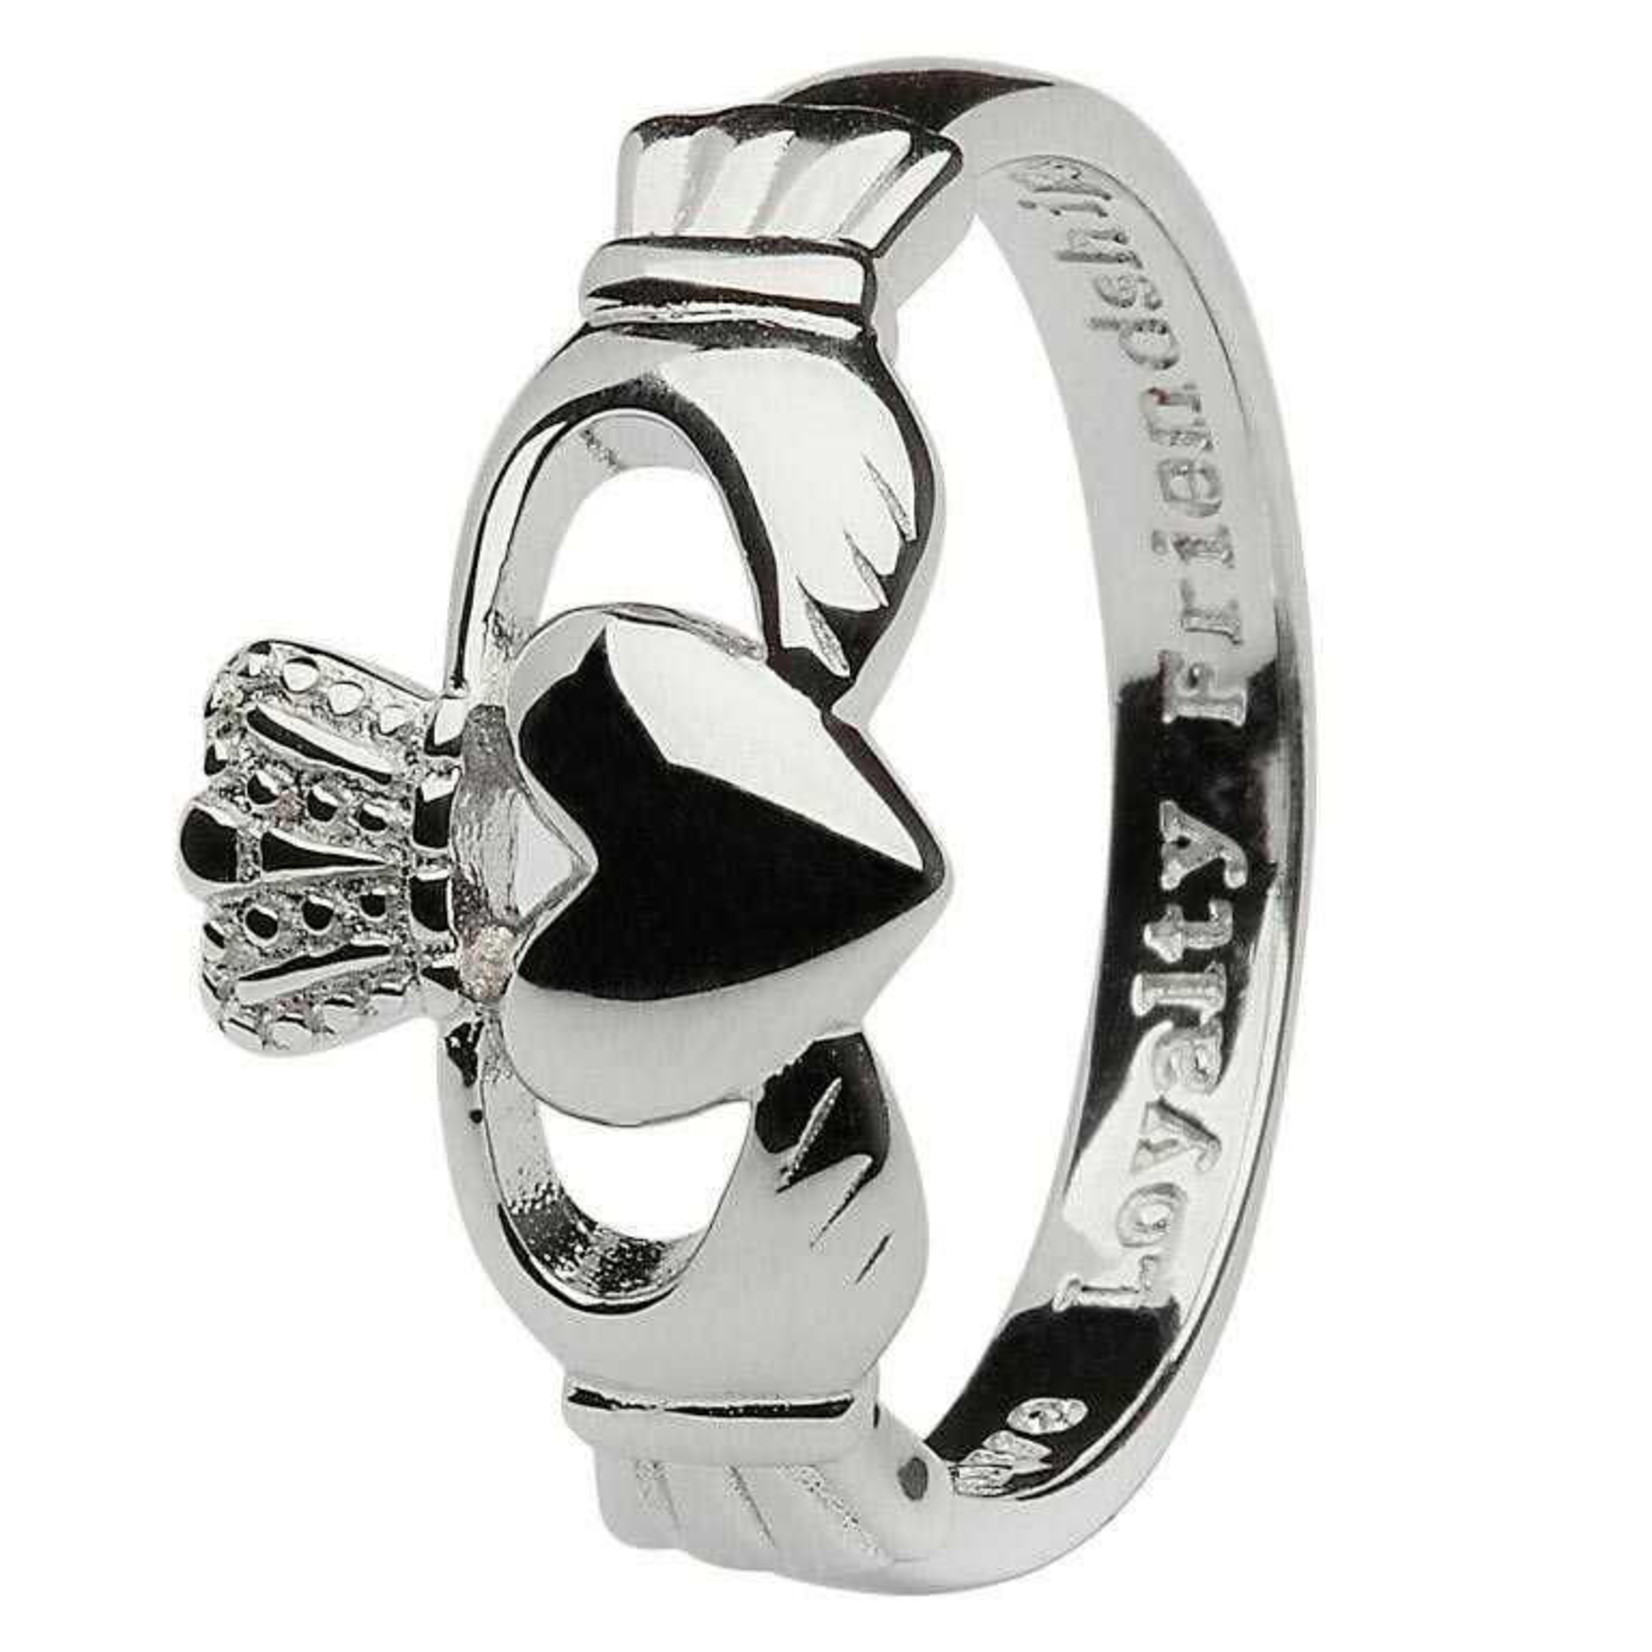 Shanore Sterling Silver Gents Claddagh Ring